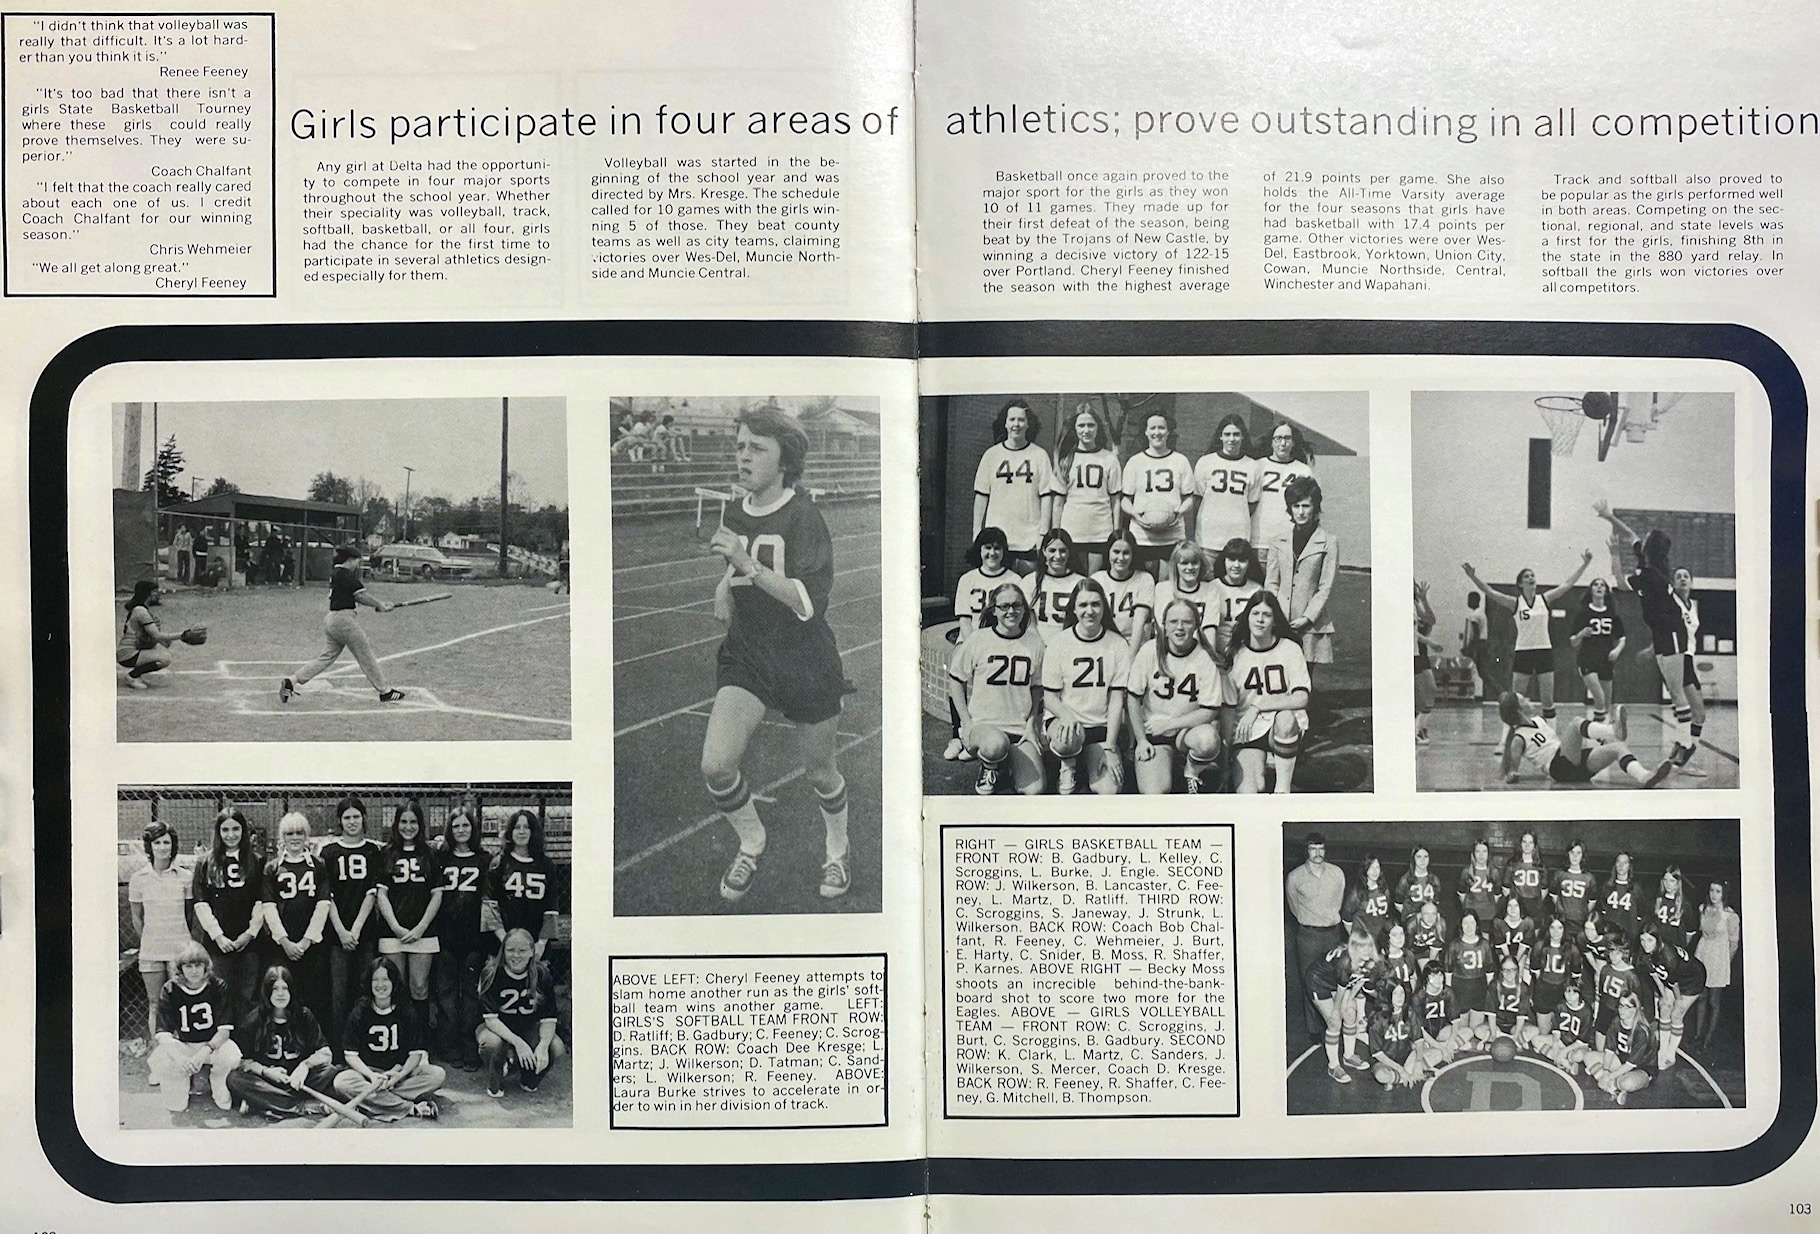 1973 DHS yearbook spread